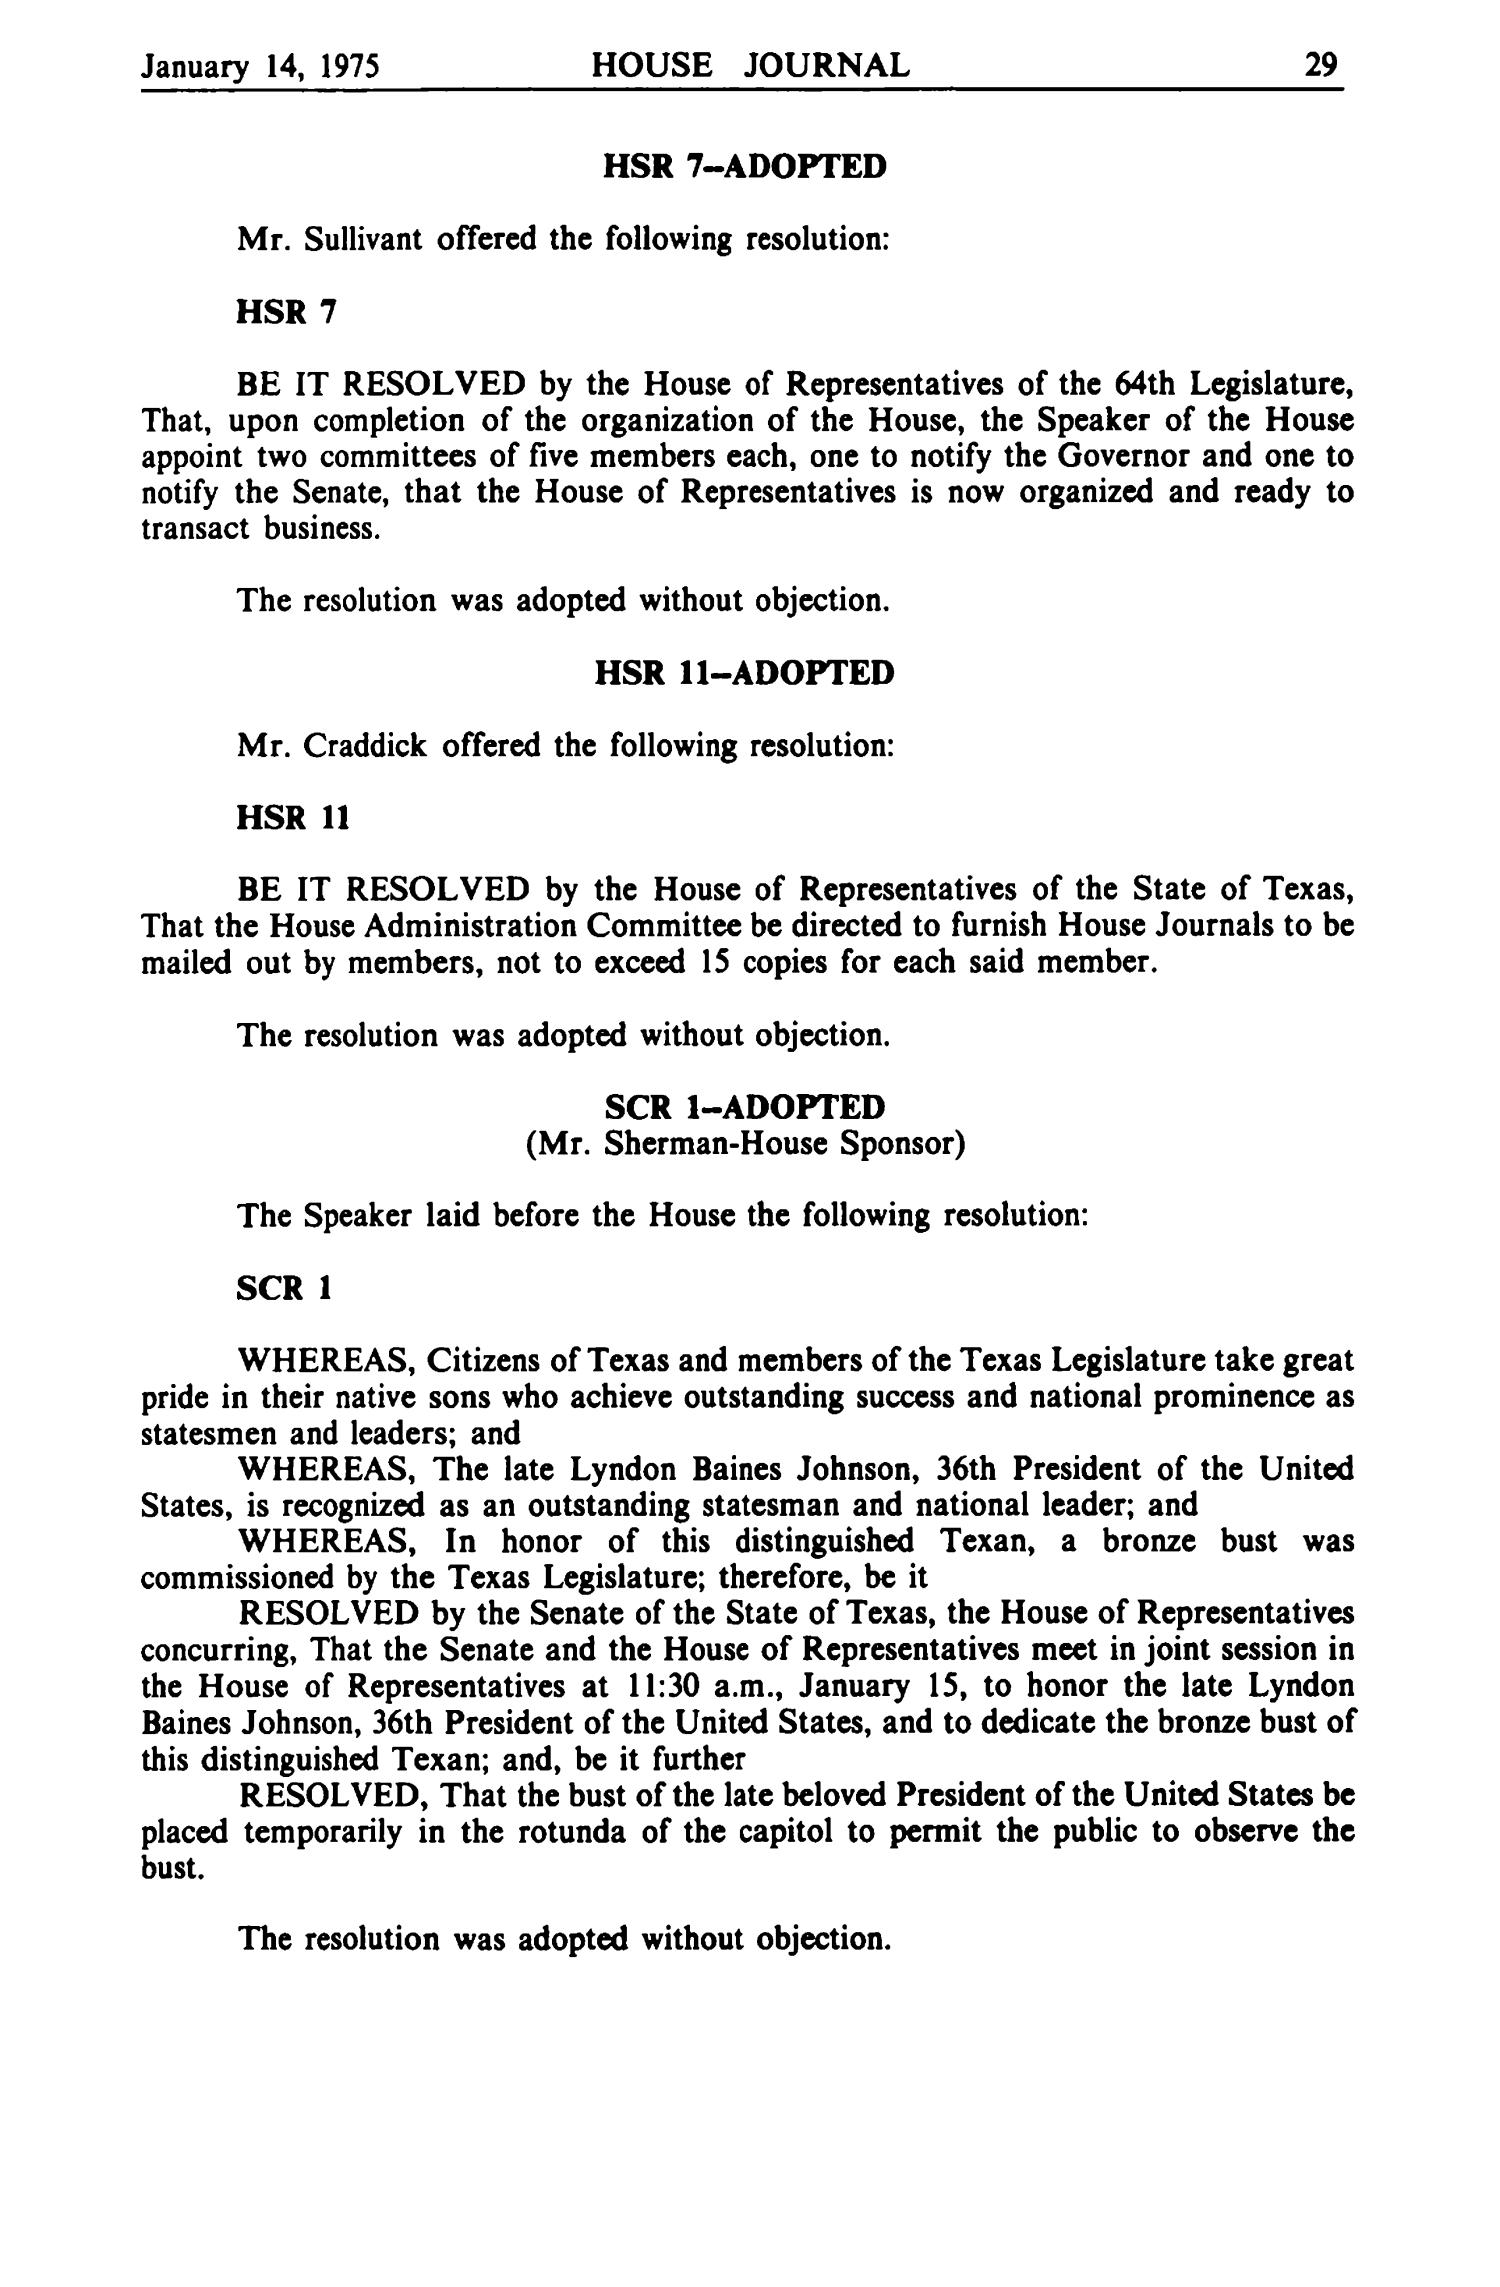 Journal of the House of Representatives of the Regular Session of the Sixty-Fourth Legislature of the State of Texas, Volume 1
                                                
                                                    29
                                                